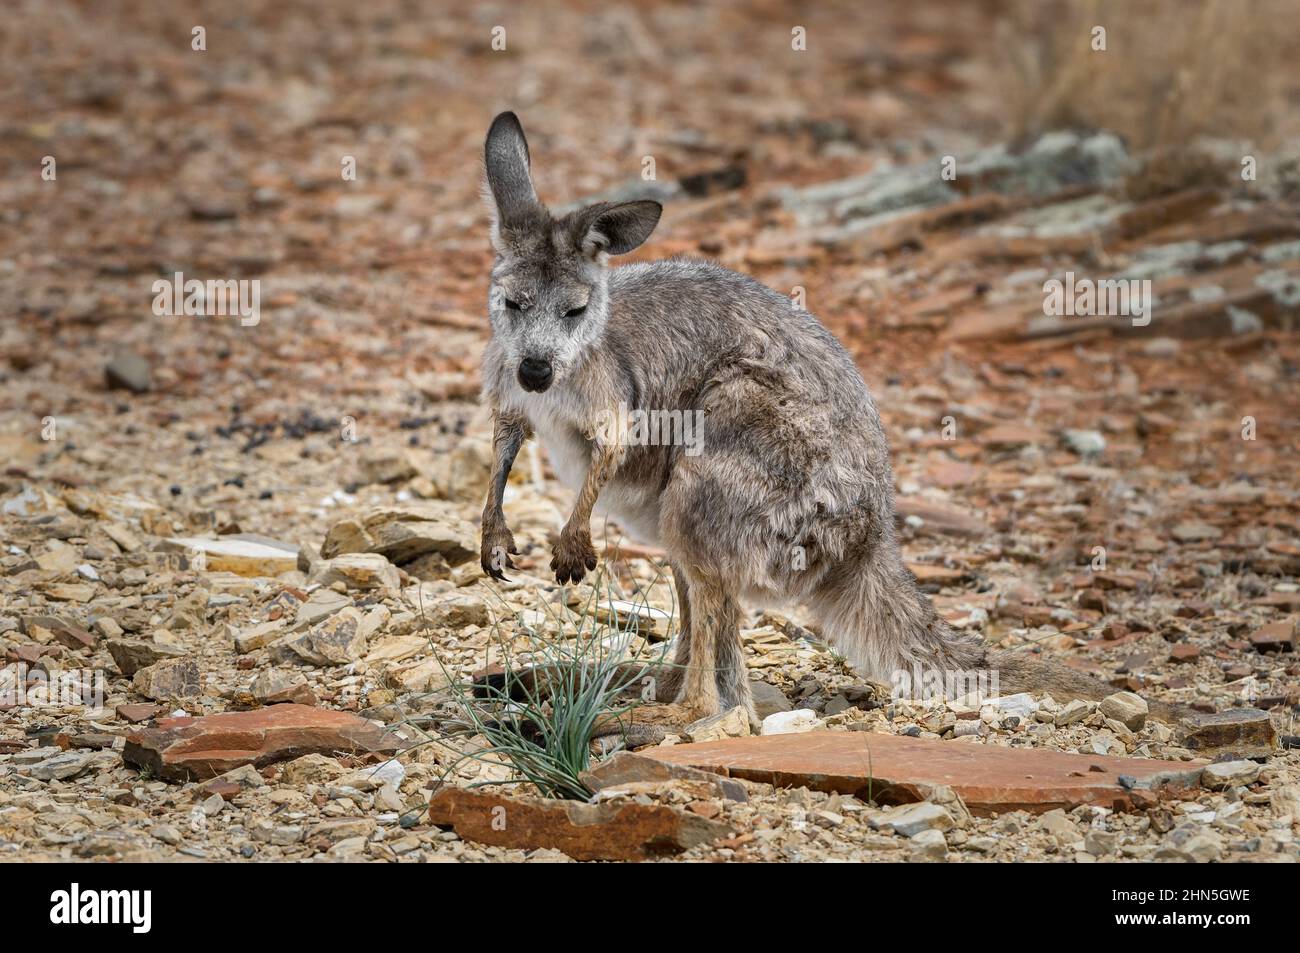 Euro Joey on a very hot summer day in the dry outback. Stock Photo